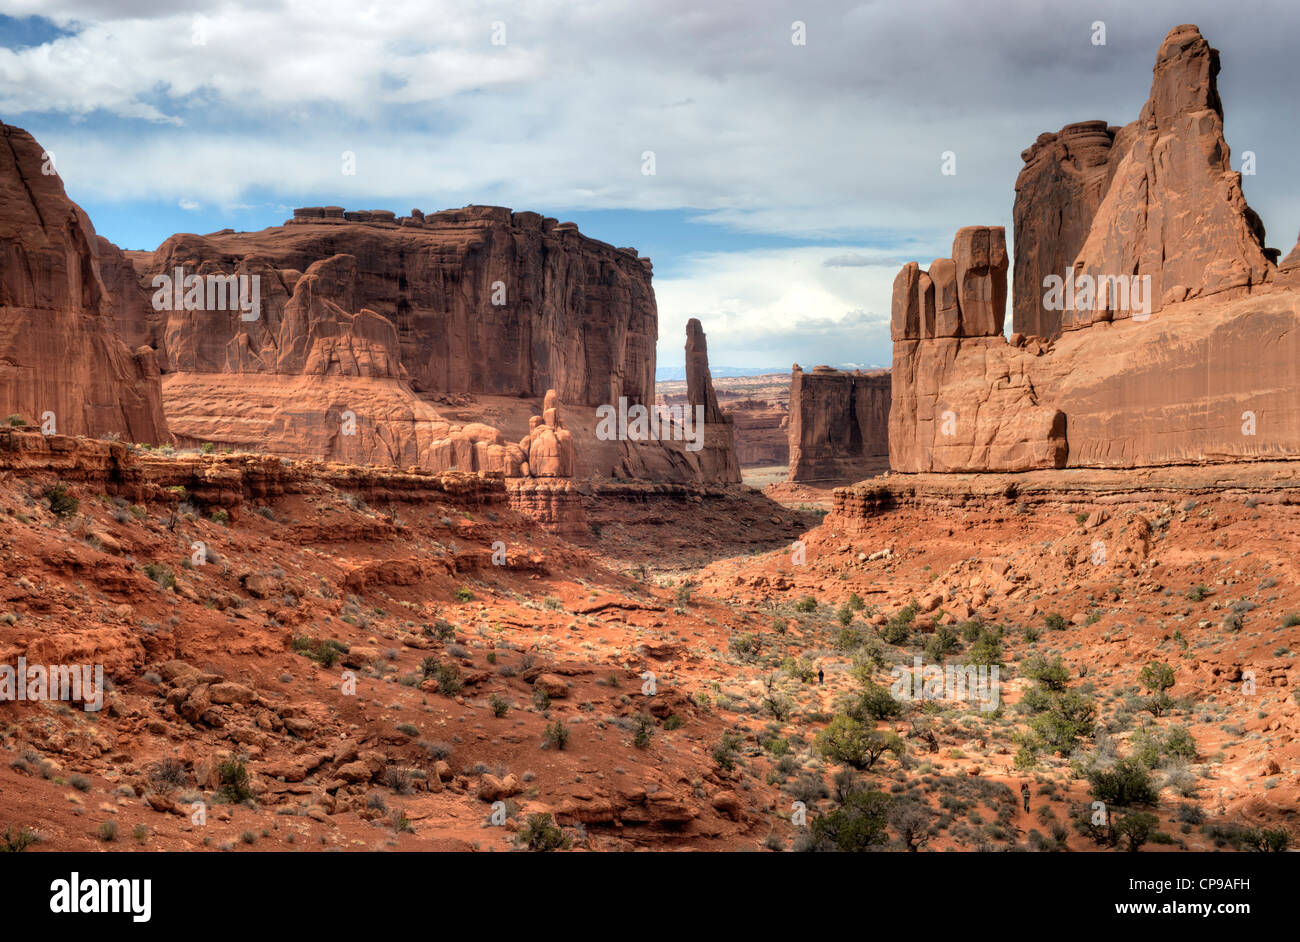 Three hikers ascend the Park Avenue trail in Utah's Arches National Park on a blustery spring day Stock Photo